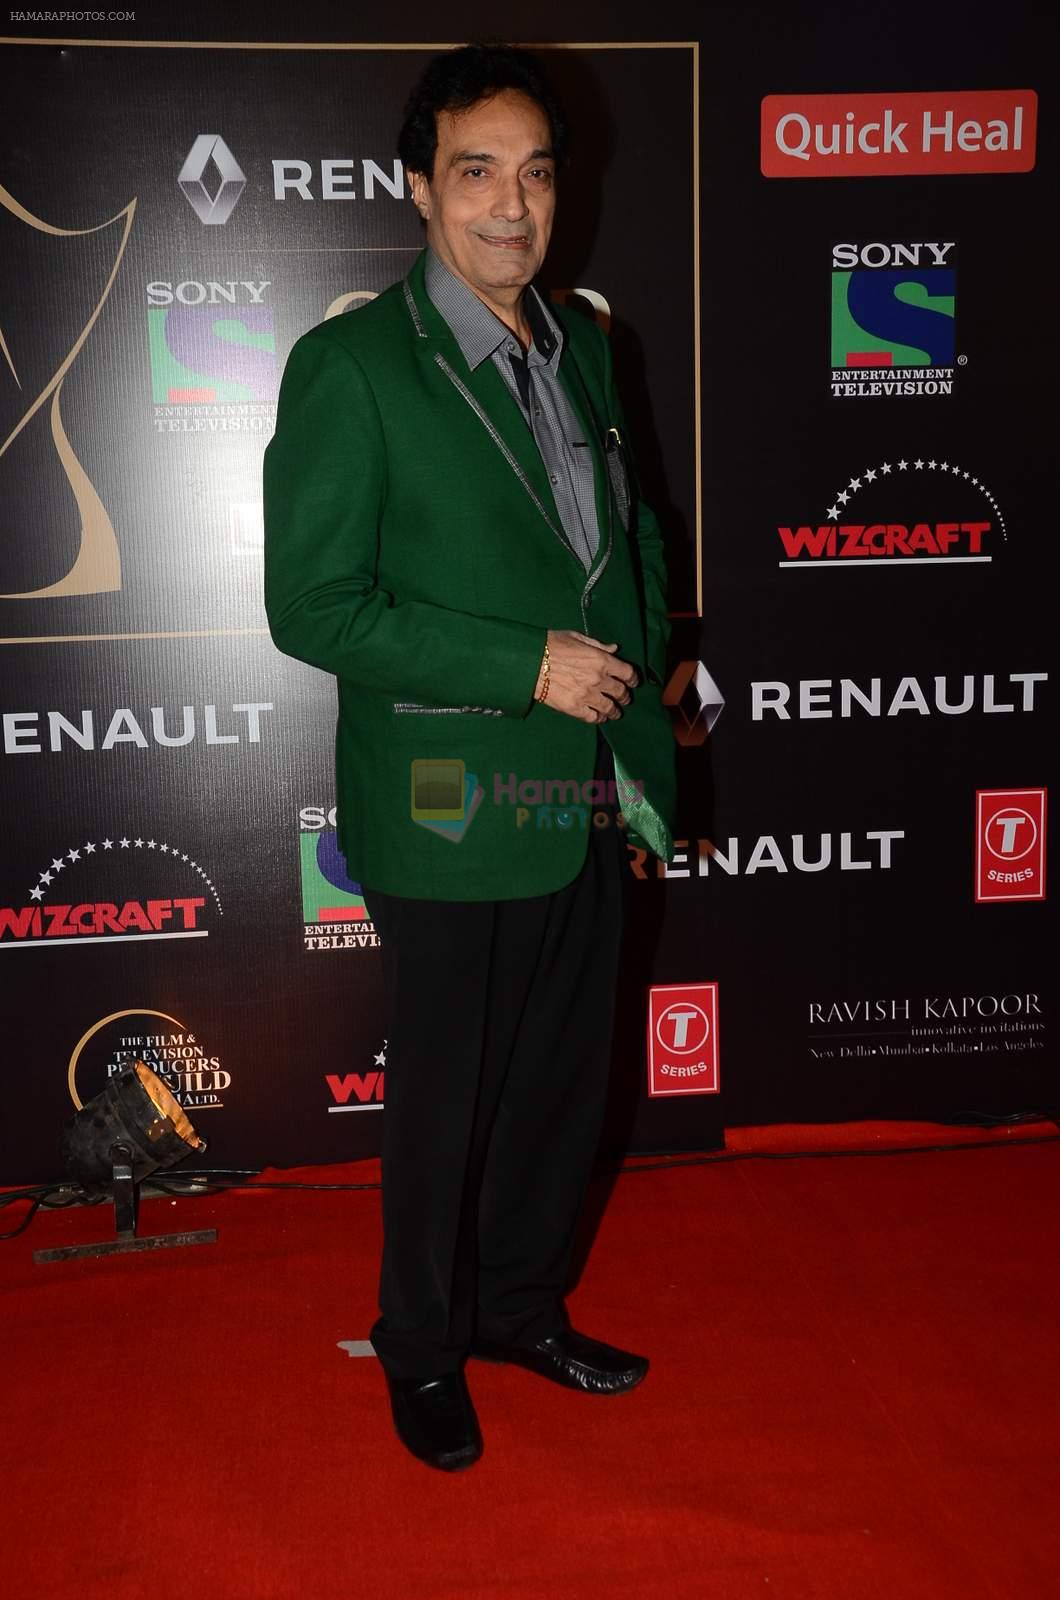 at Producer's Guild Awards on 22nd Dec 2015